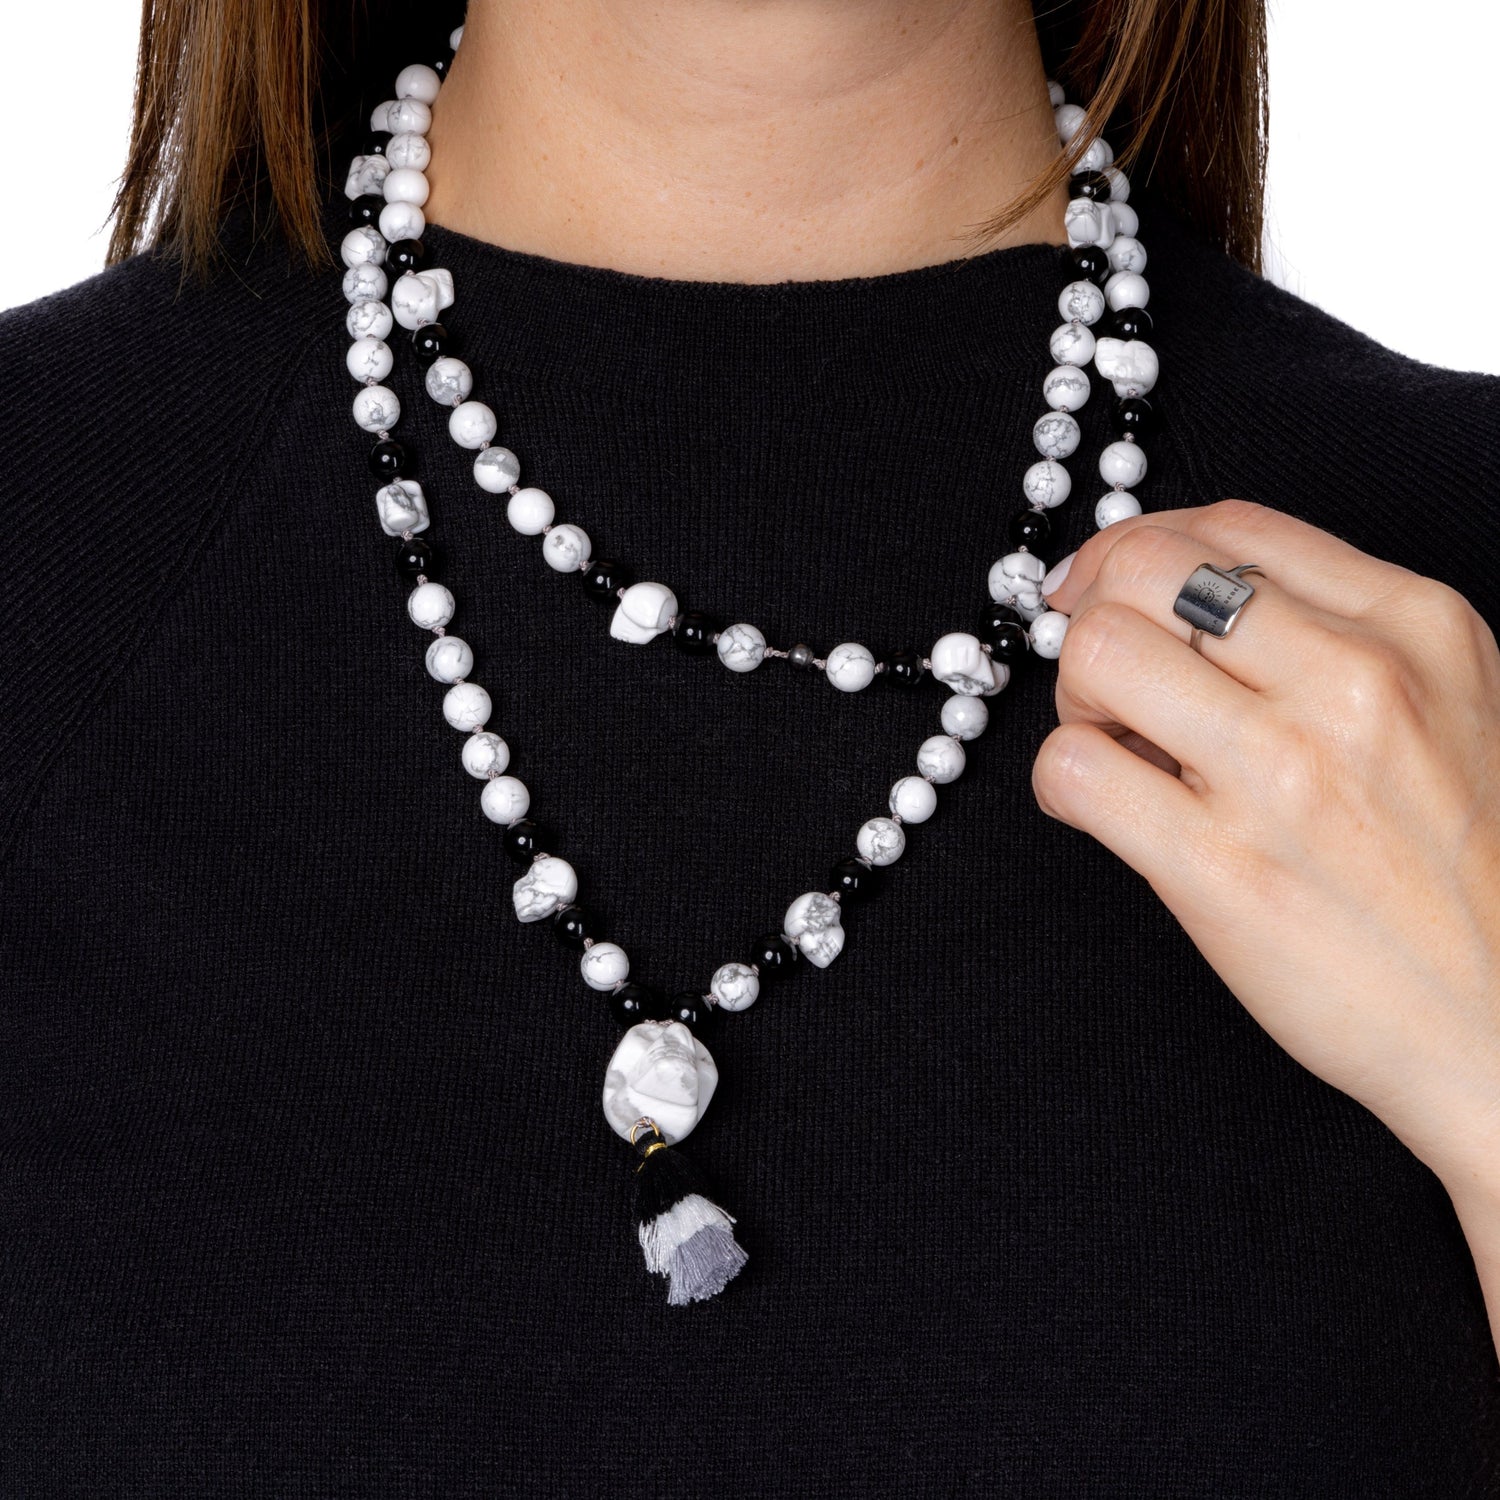 Howlite and Obsidian Mala Necklace on Woman